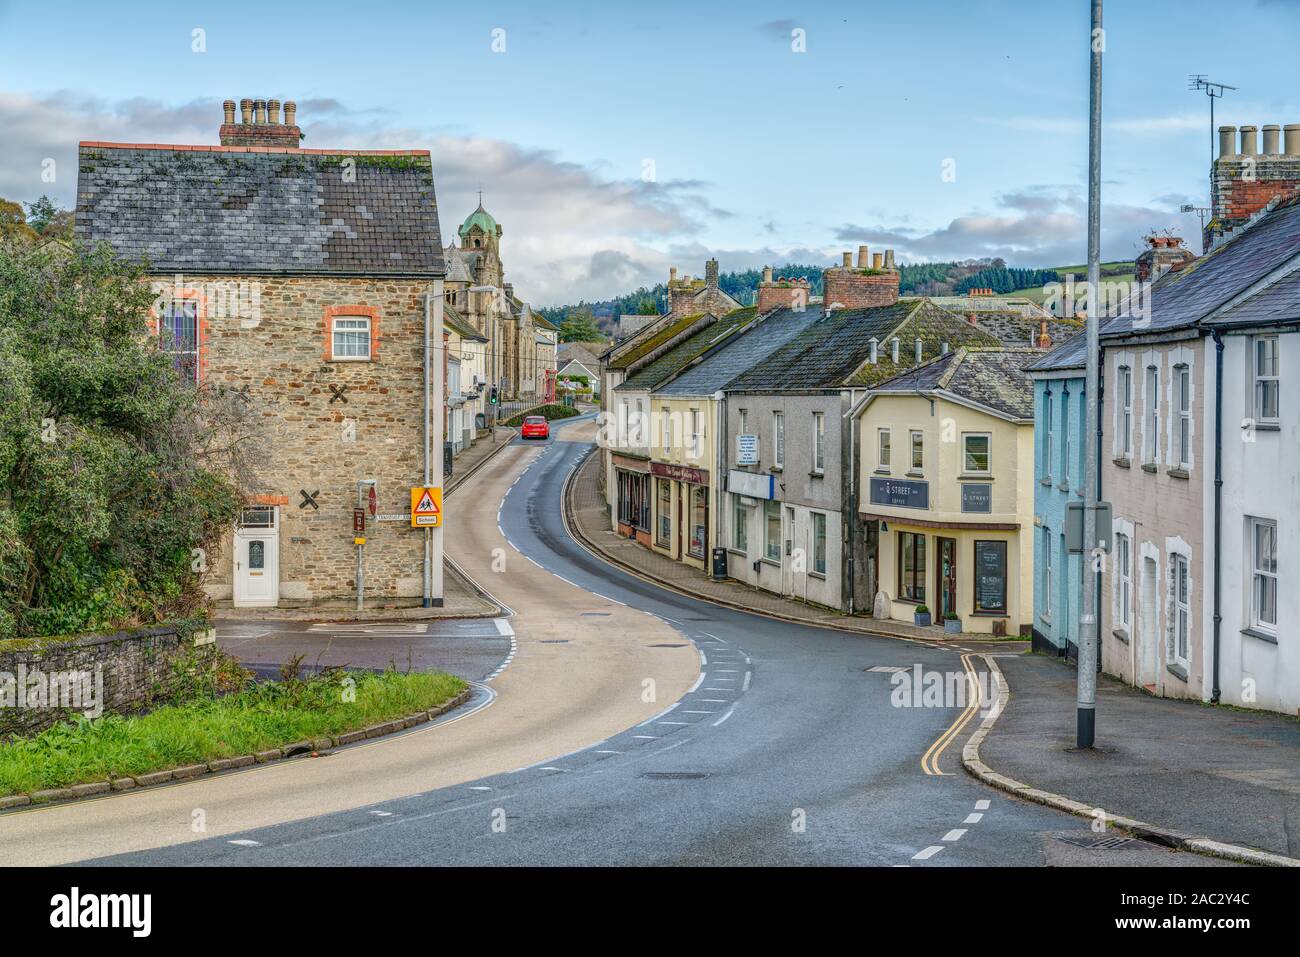 A colourful and quaint landscape of Lostwithiel Town, Cornwall, England, showing the main A390 road that passes through the shops and businesses. Stock Photo